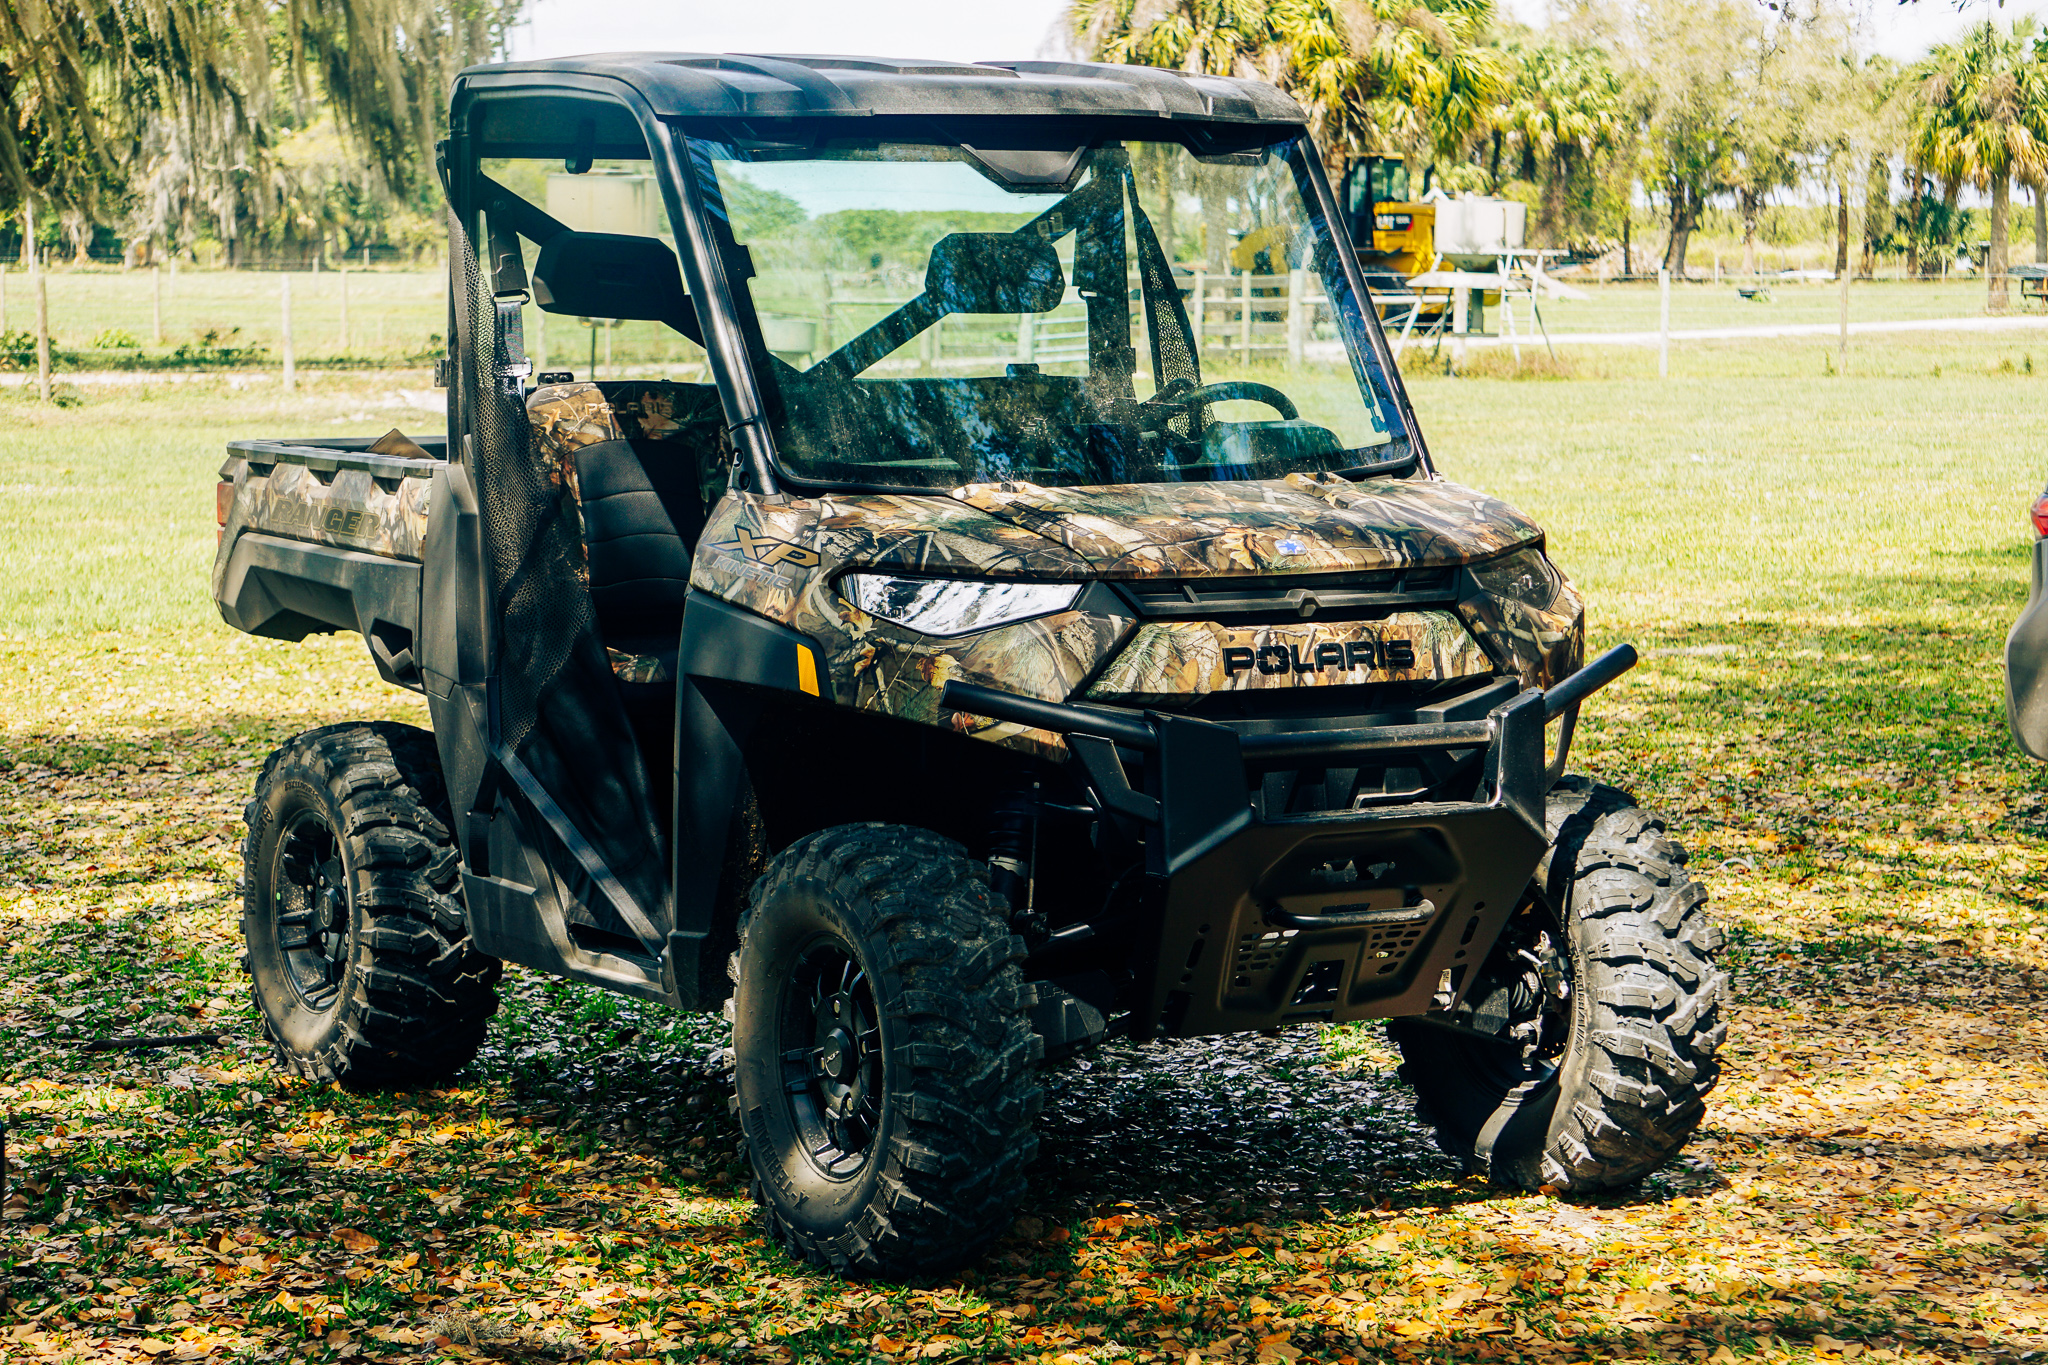 the-ranger-kinetic-is-the-electric-utv-hunters-want-outdoor-life